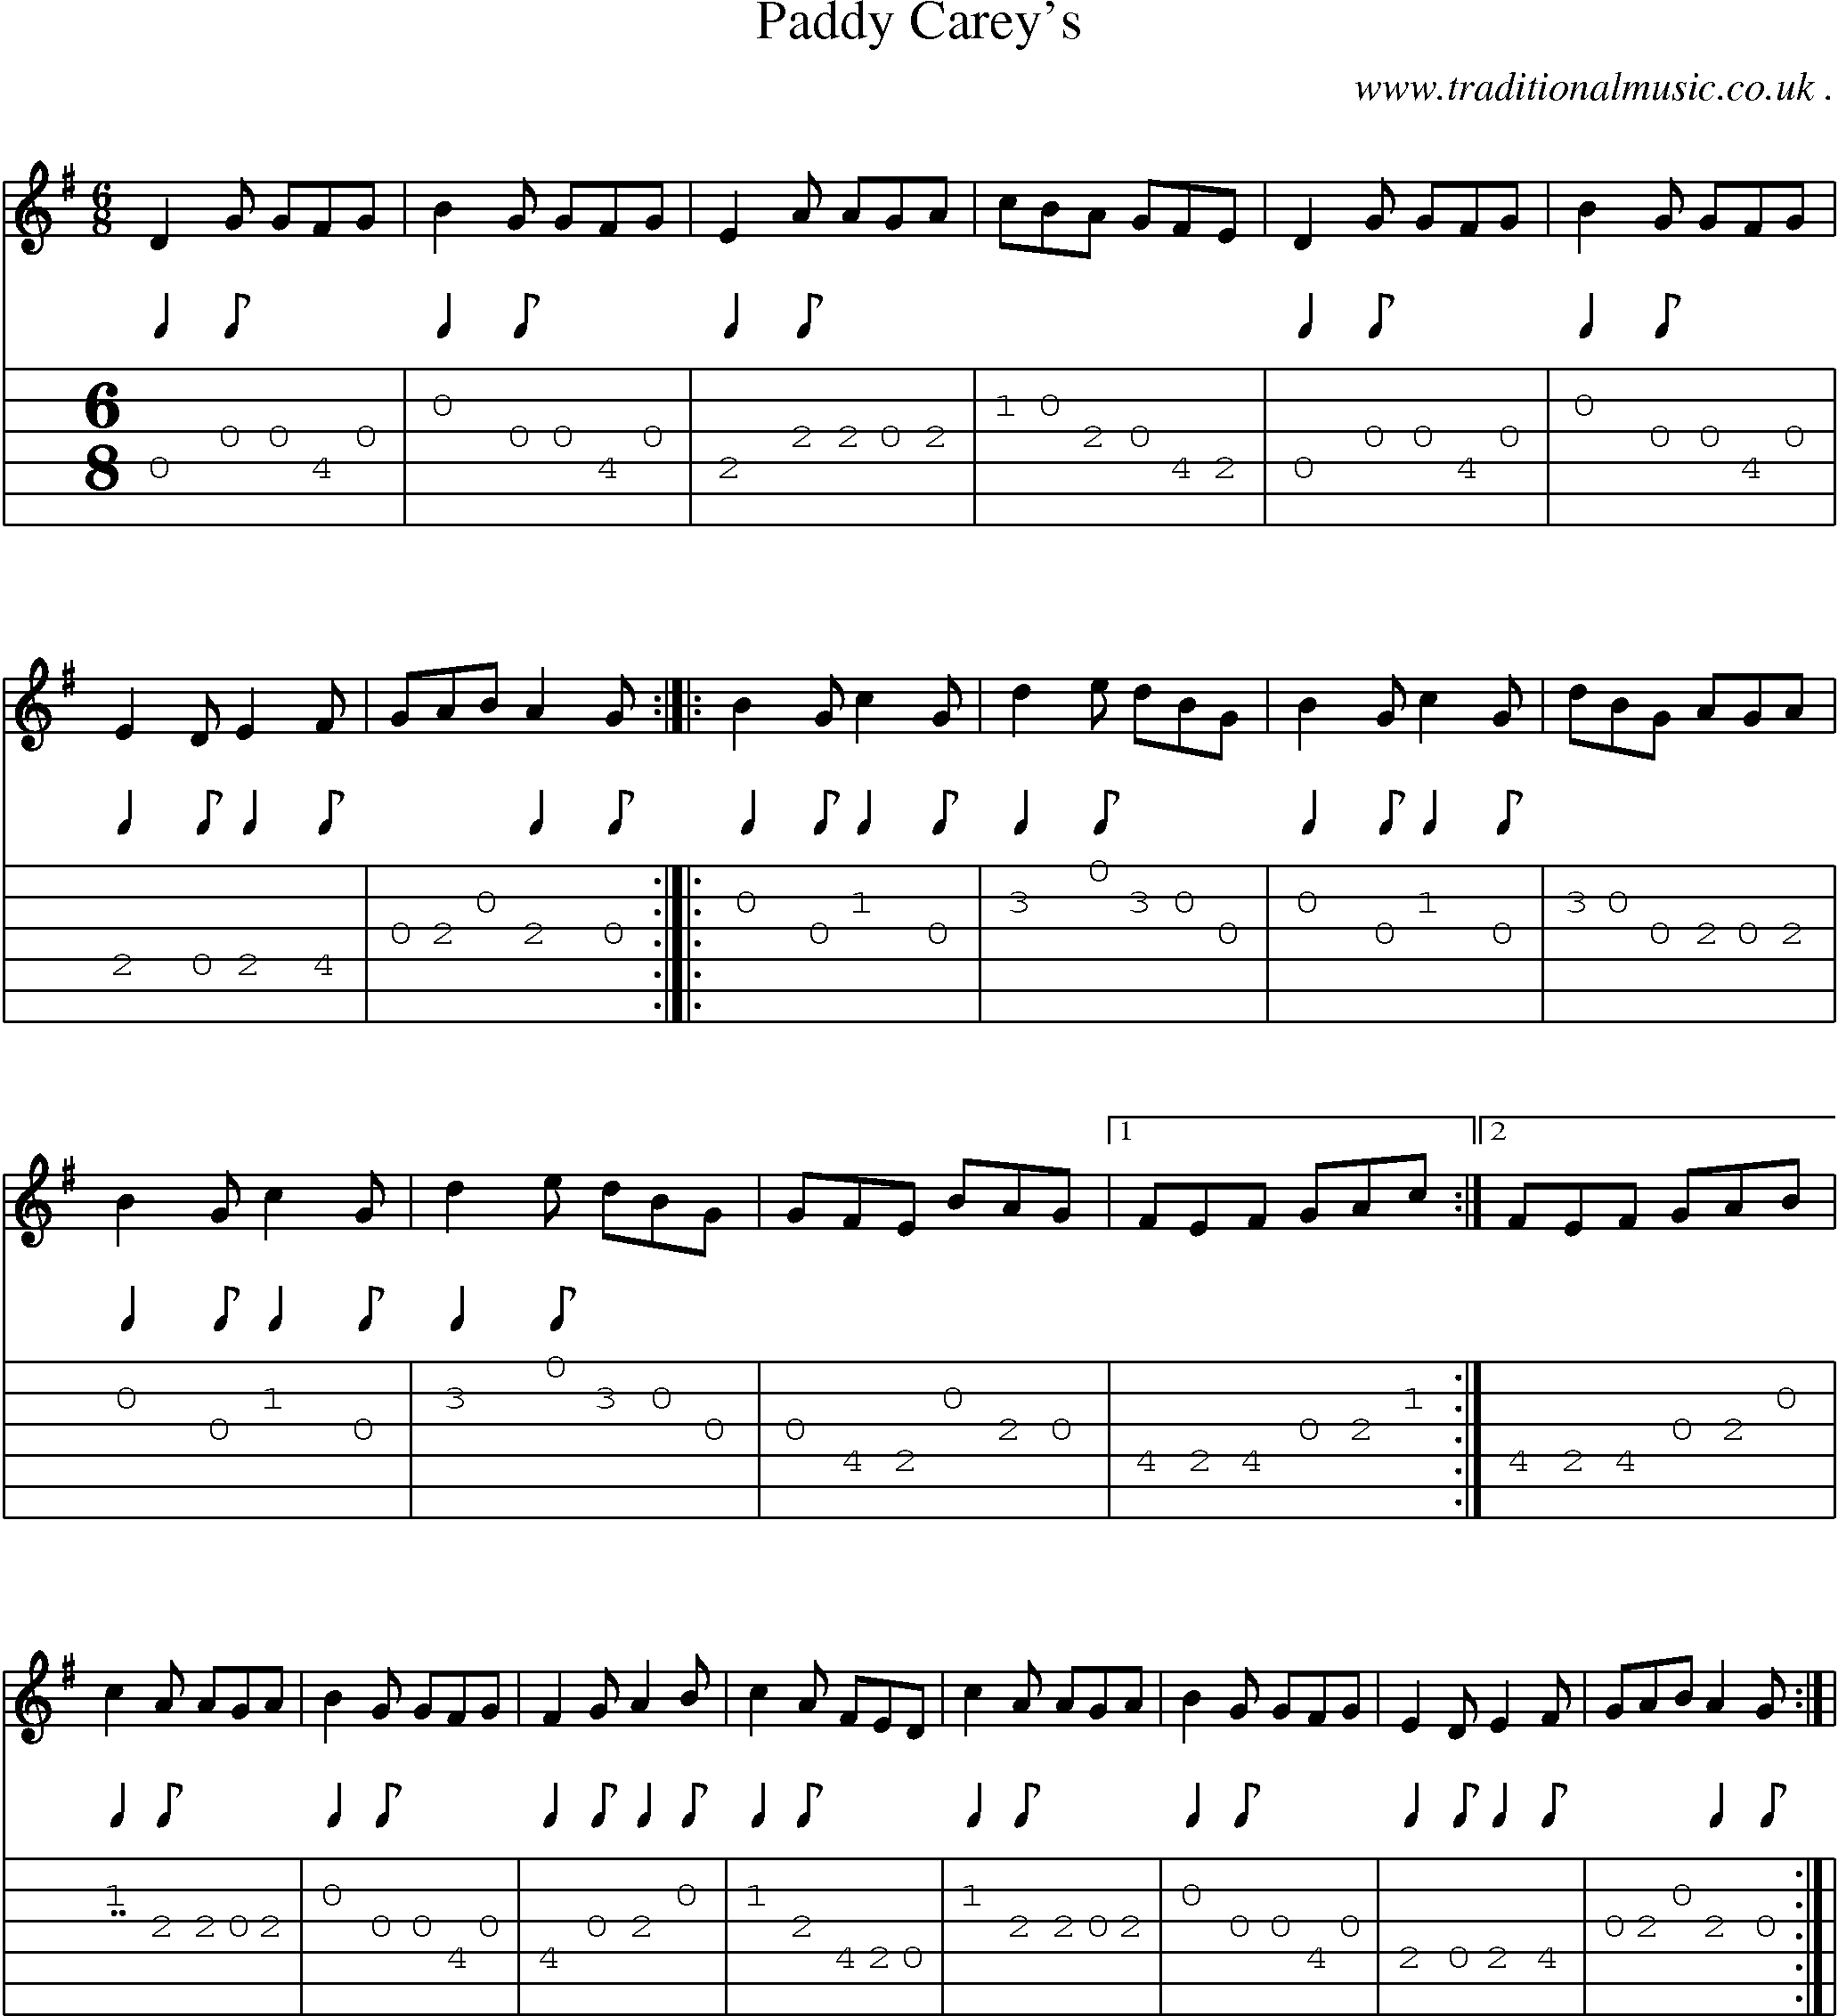 Sheet-Music and Guitar Tabs for Paddy Careys